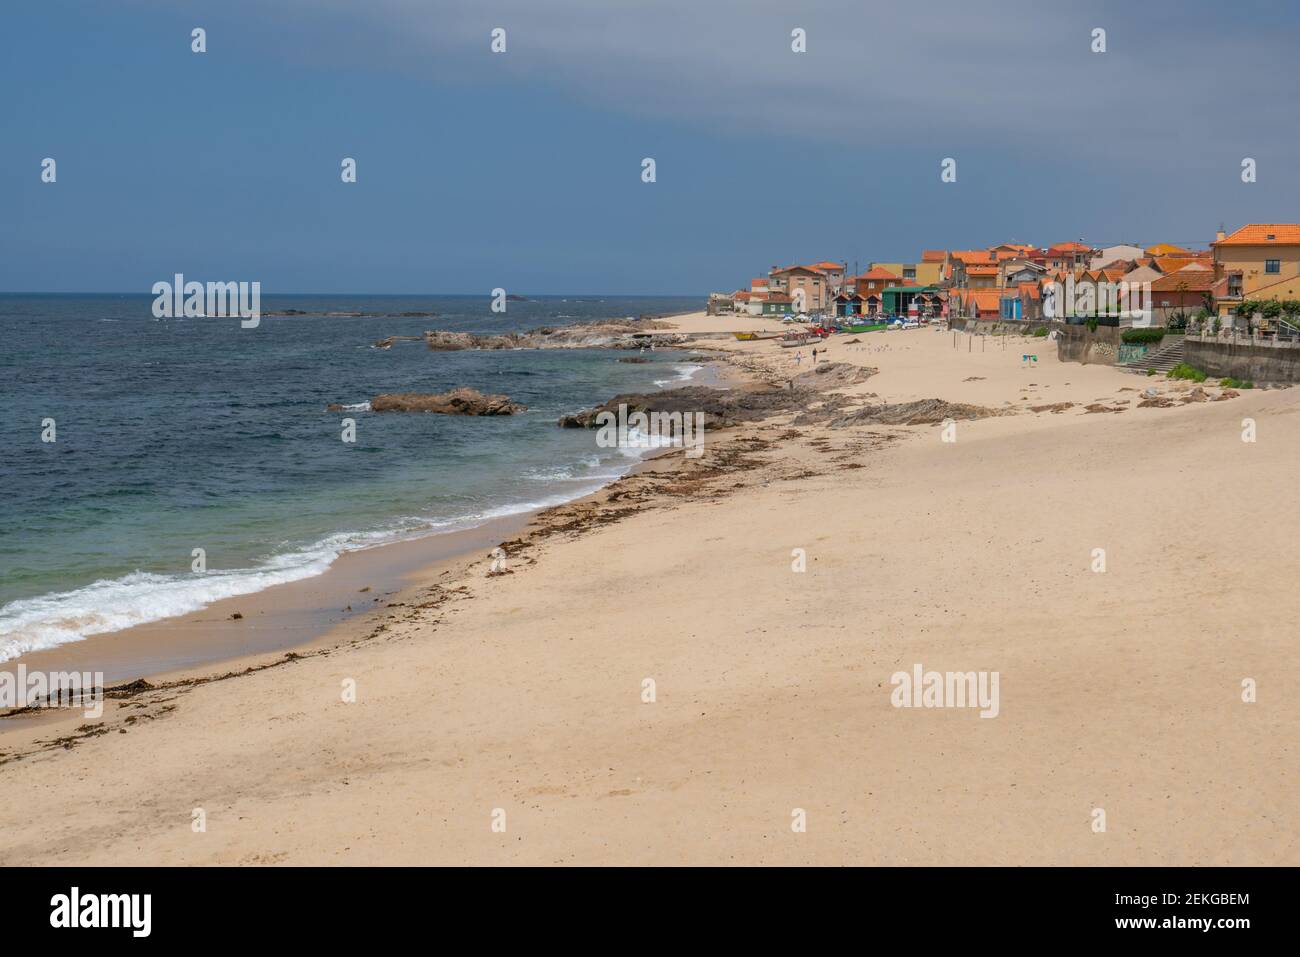 Fishermen vilage of Vila Cha with fishing boats on the beaches and fishermen houses in Portugal Stock Photo